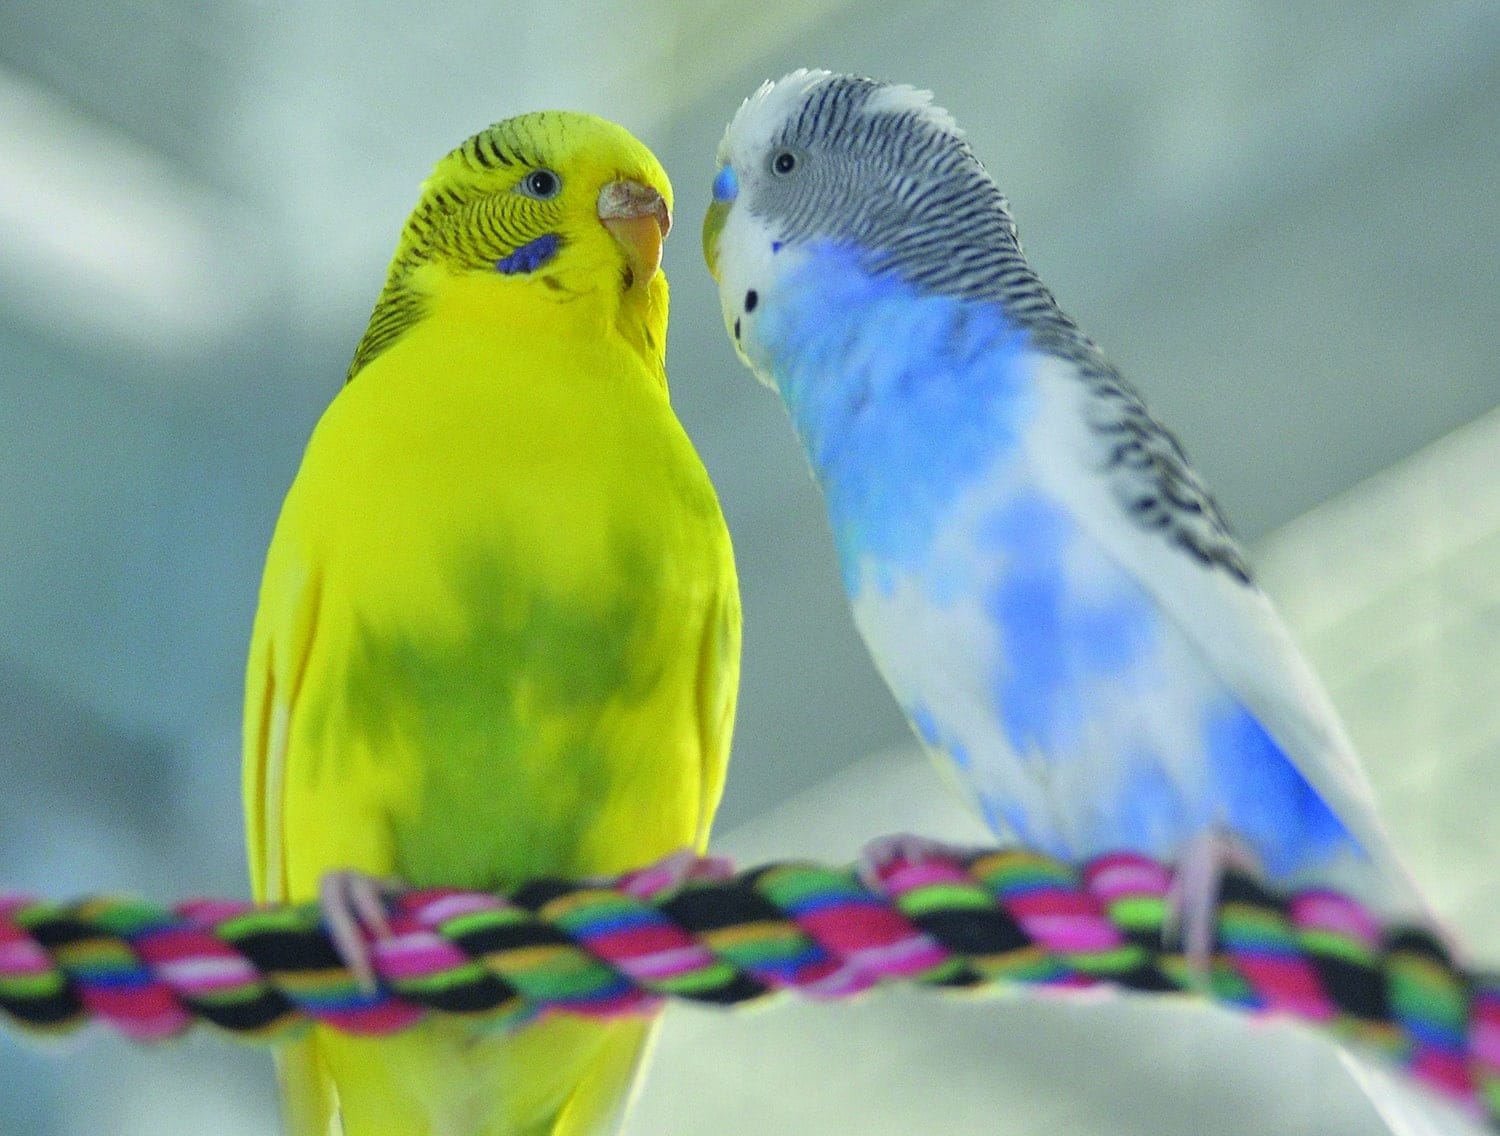 Now the rescued parakeets can live a wonderful life.